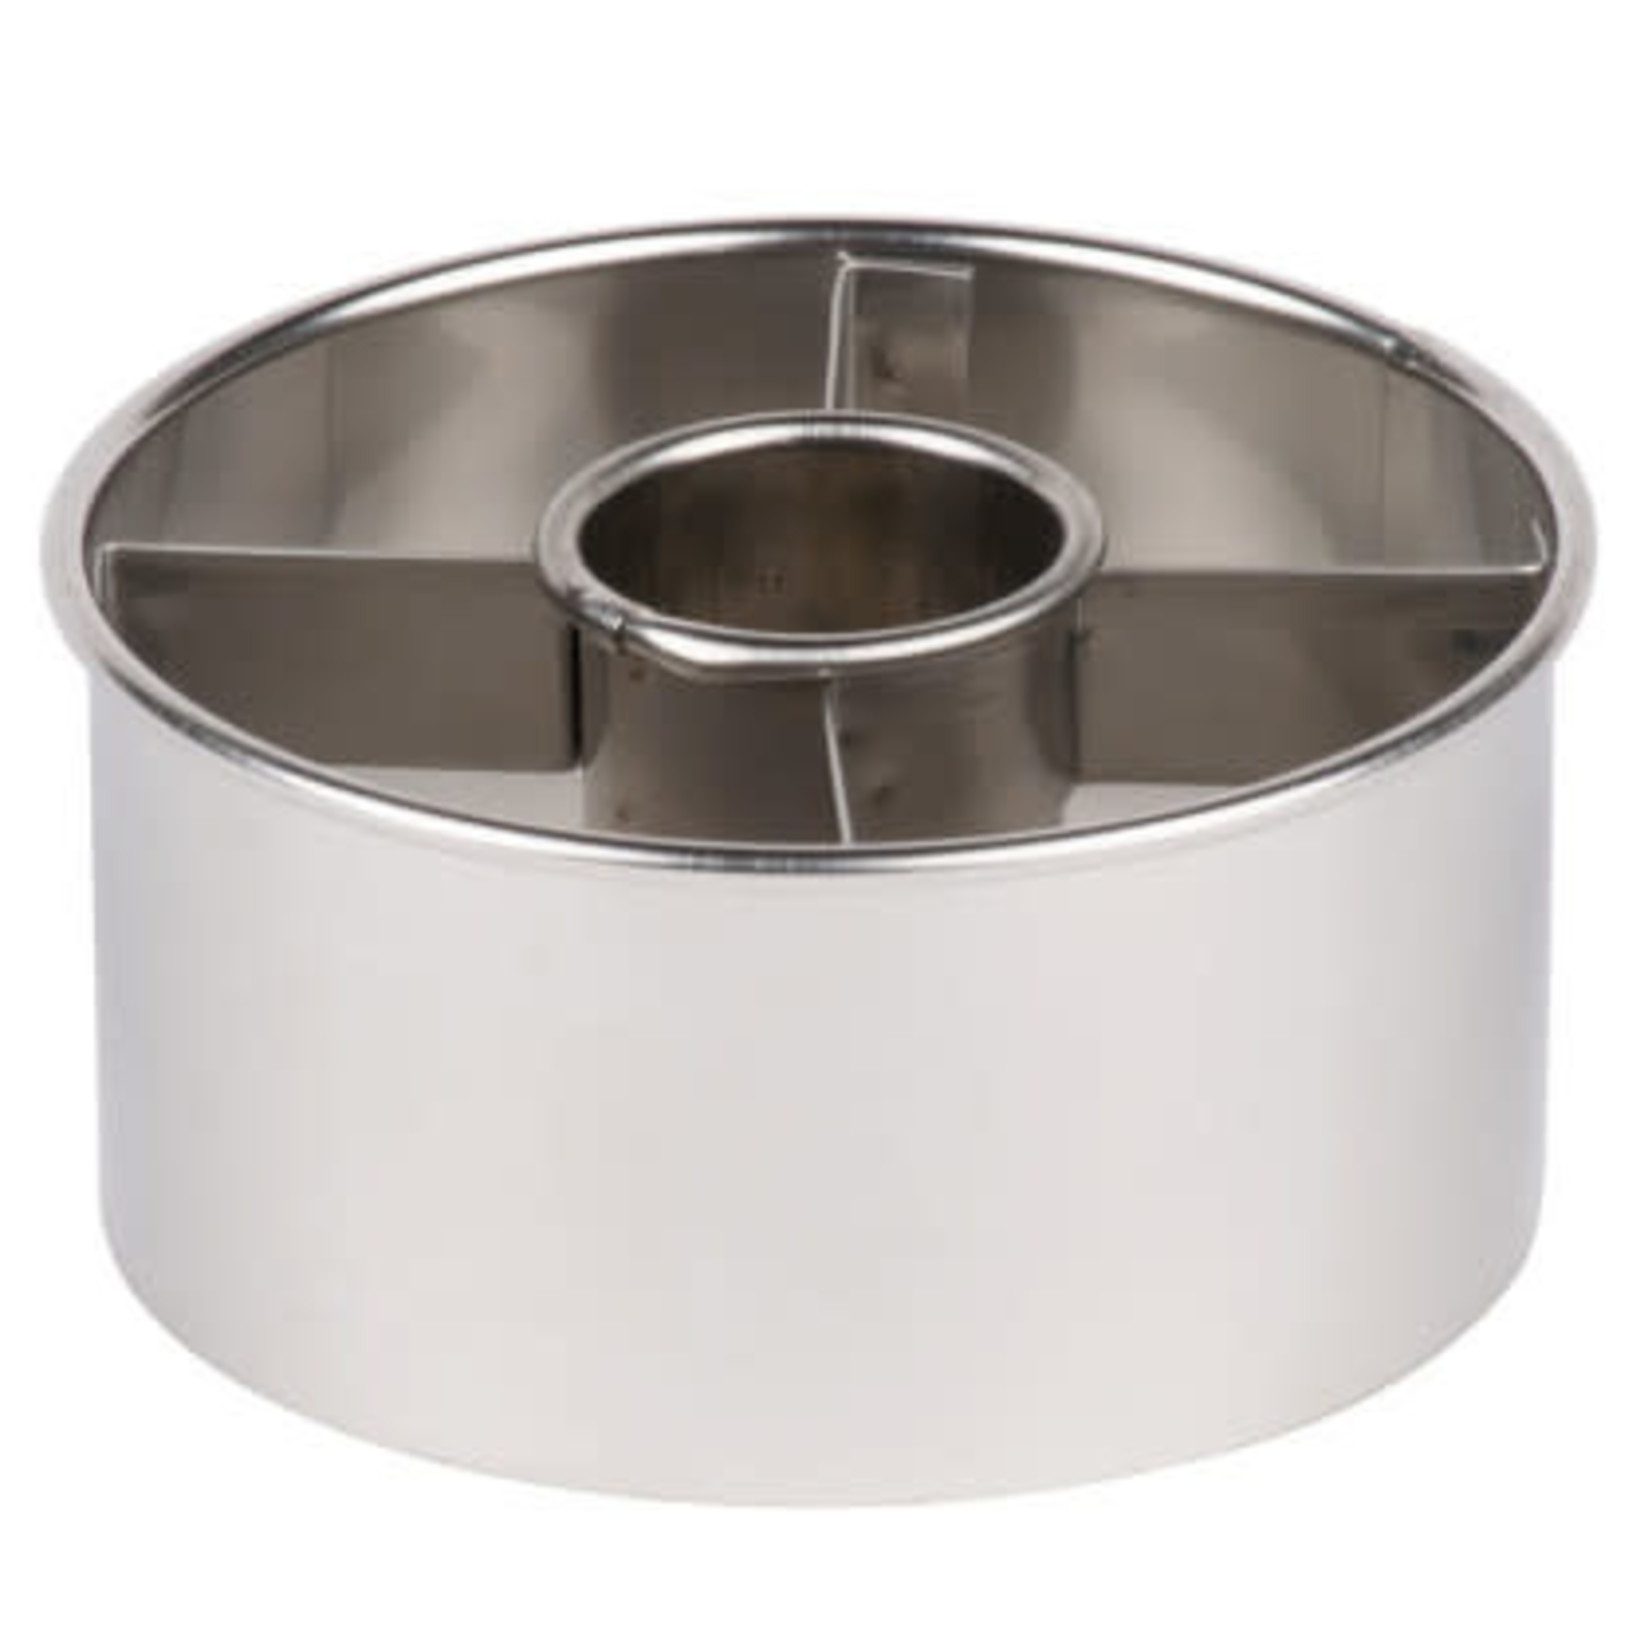 Silver Stainless Steel 3 In 1 Tin Can Cutter